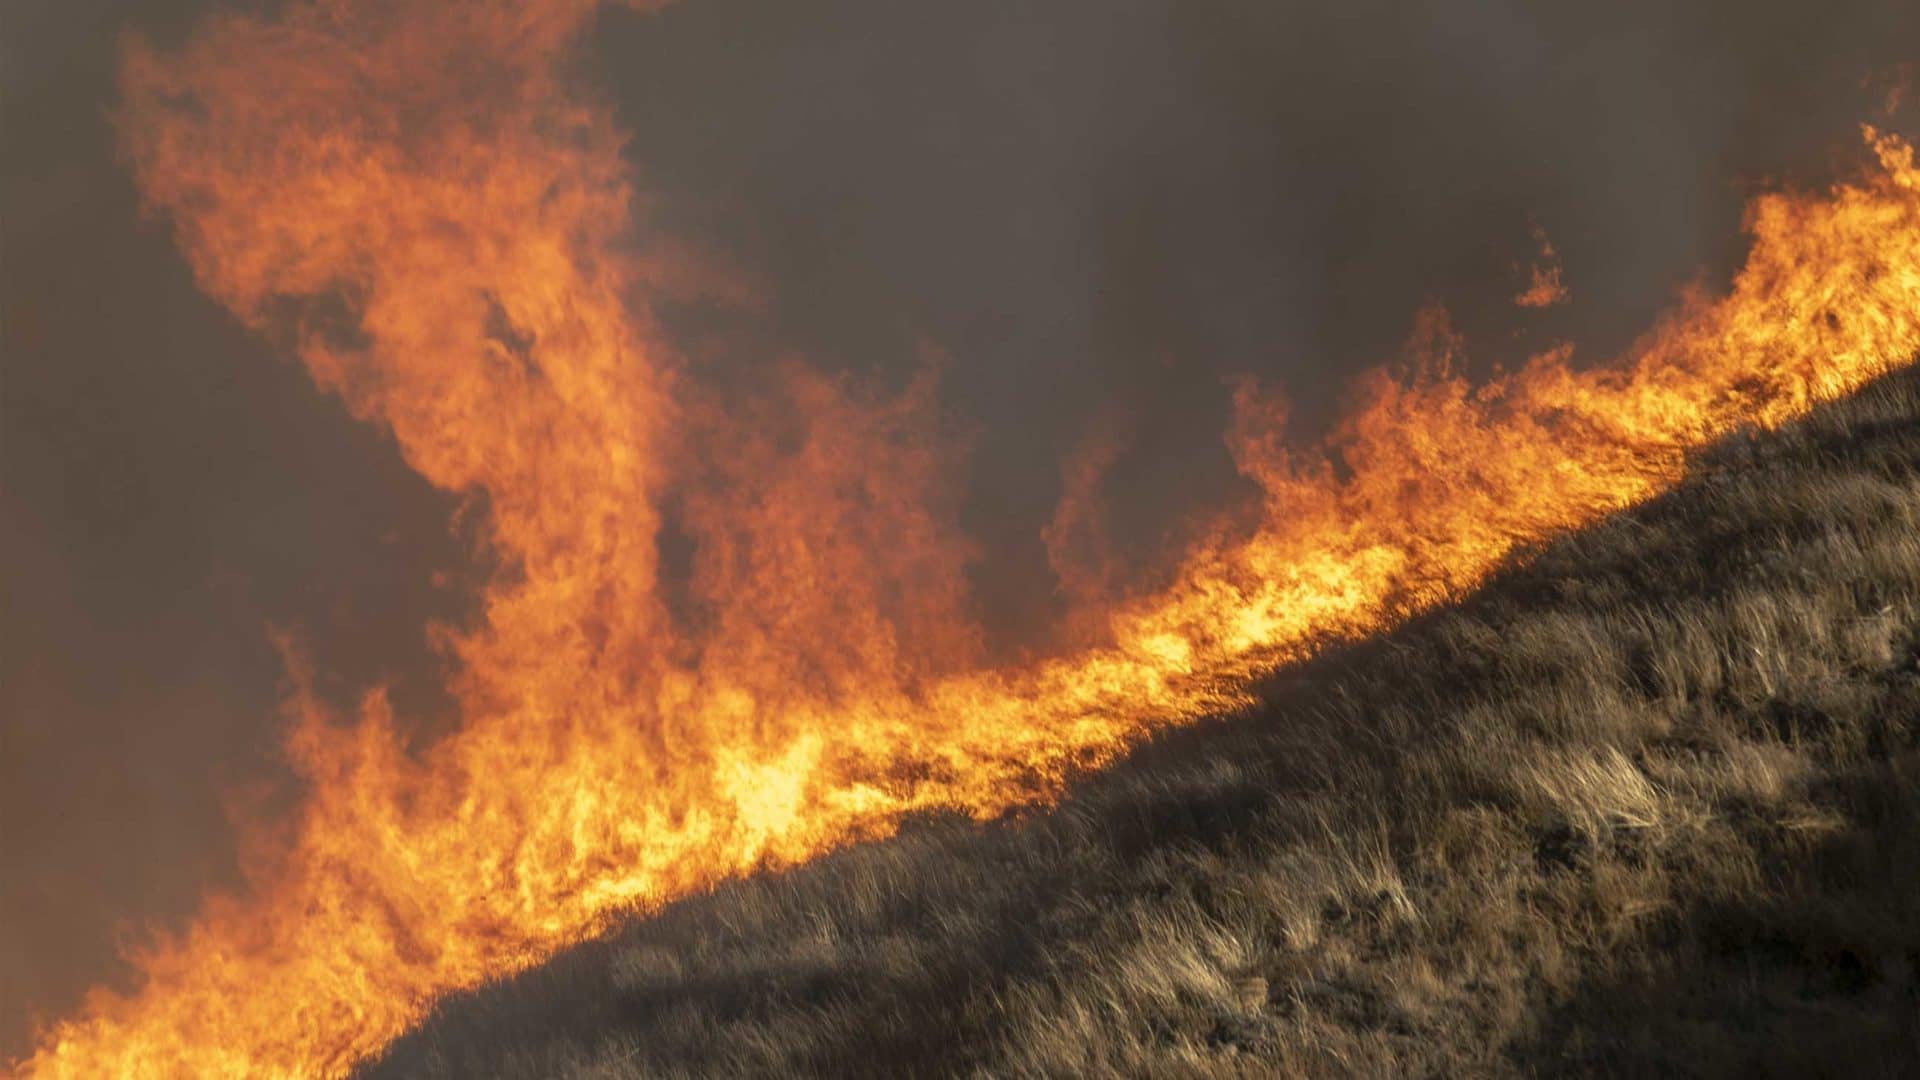 Strong winds were driving the Easy Fire near Simi Valley, California this week,  threatening the Ronald Reagan Presidential Library and nearby residential neighborhoods.